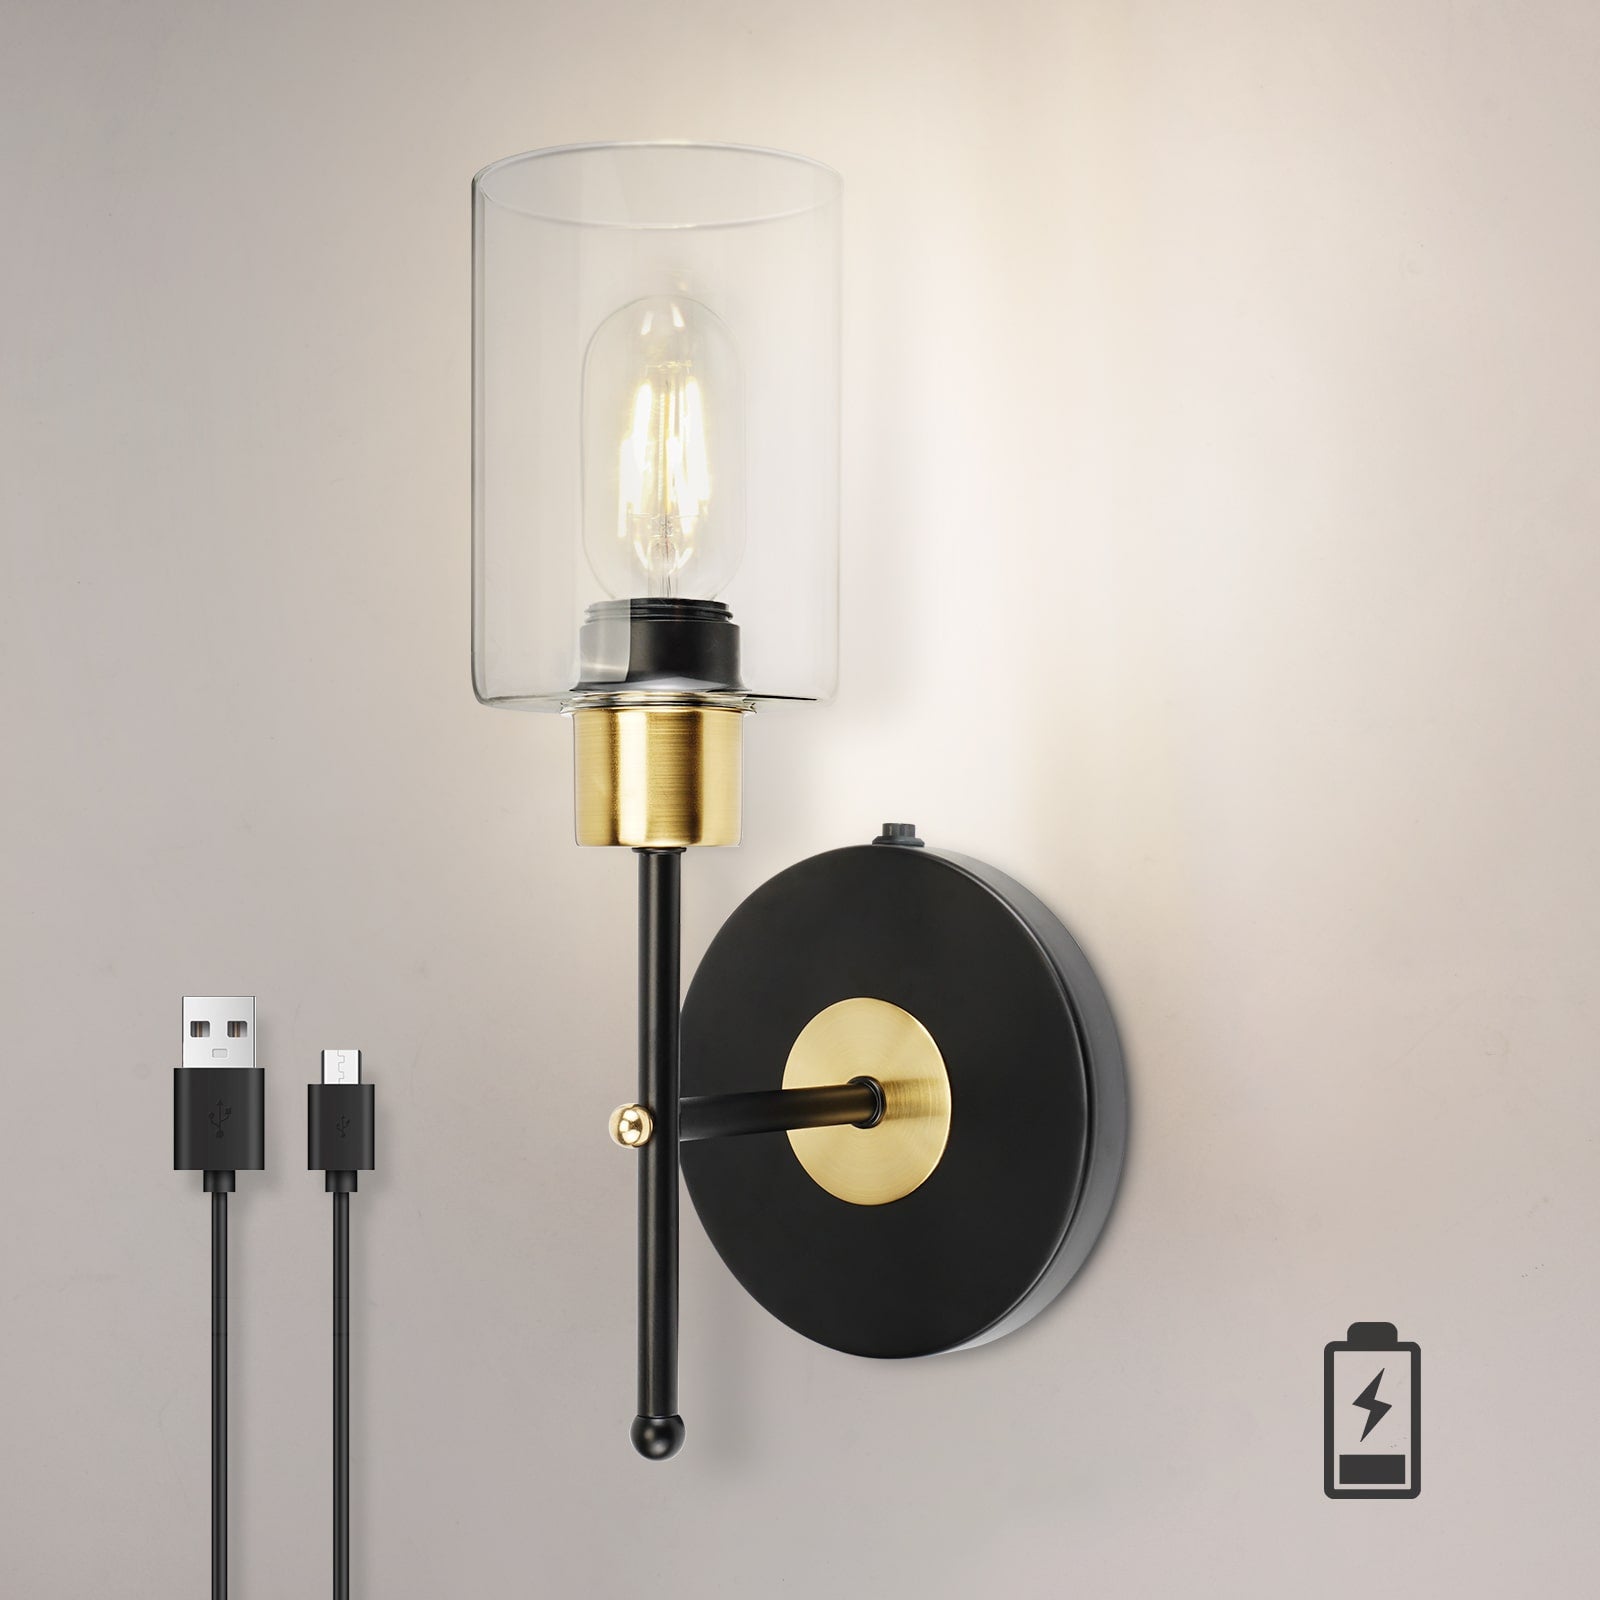 C01 Battery Operated Wall Sconces Lamp with Clear Glass Shade Cordless Fixtures